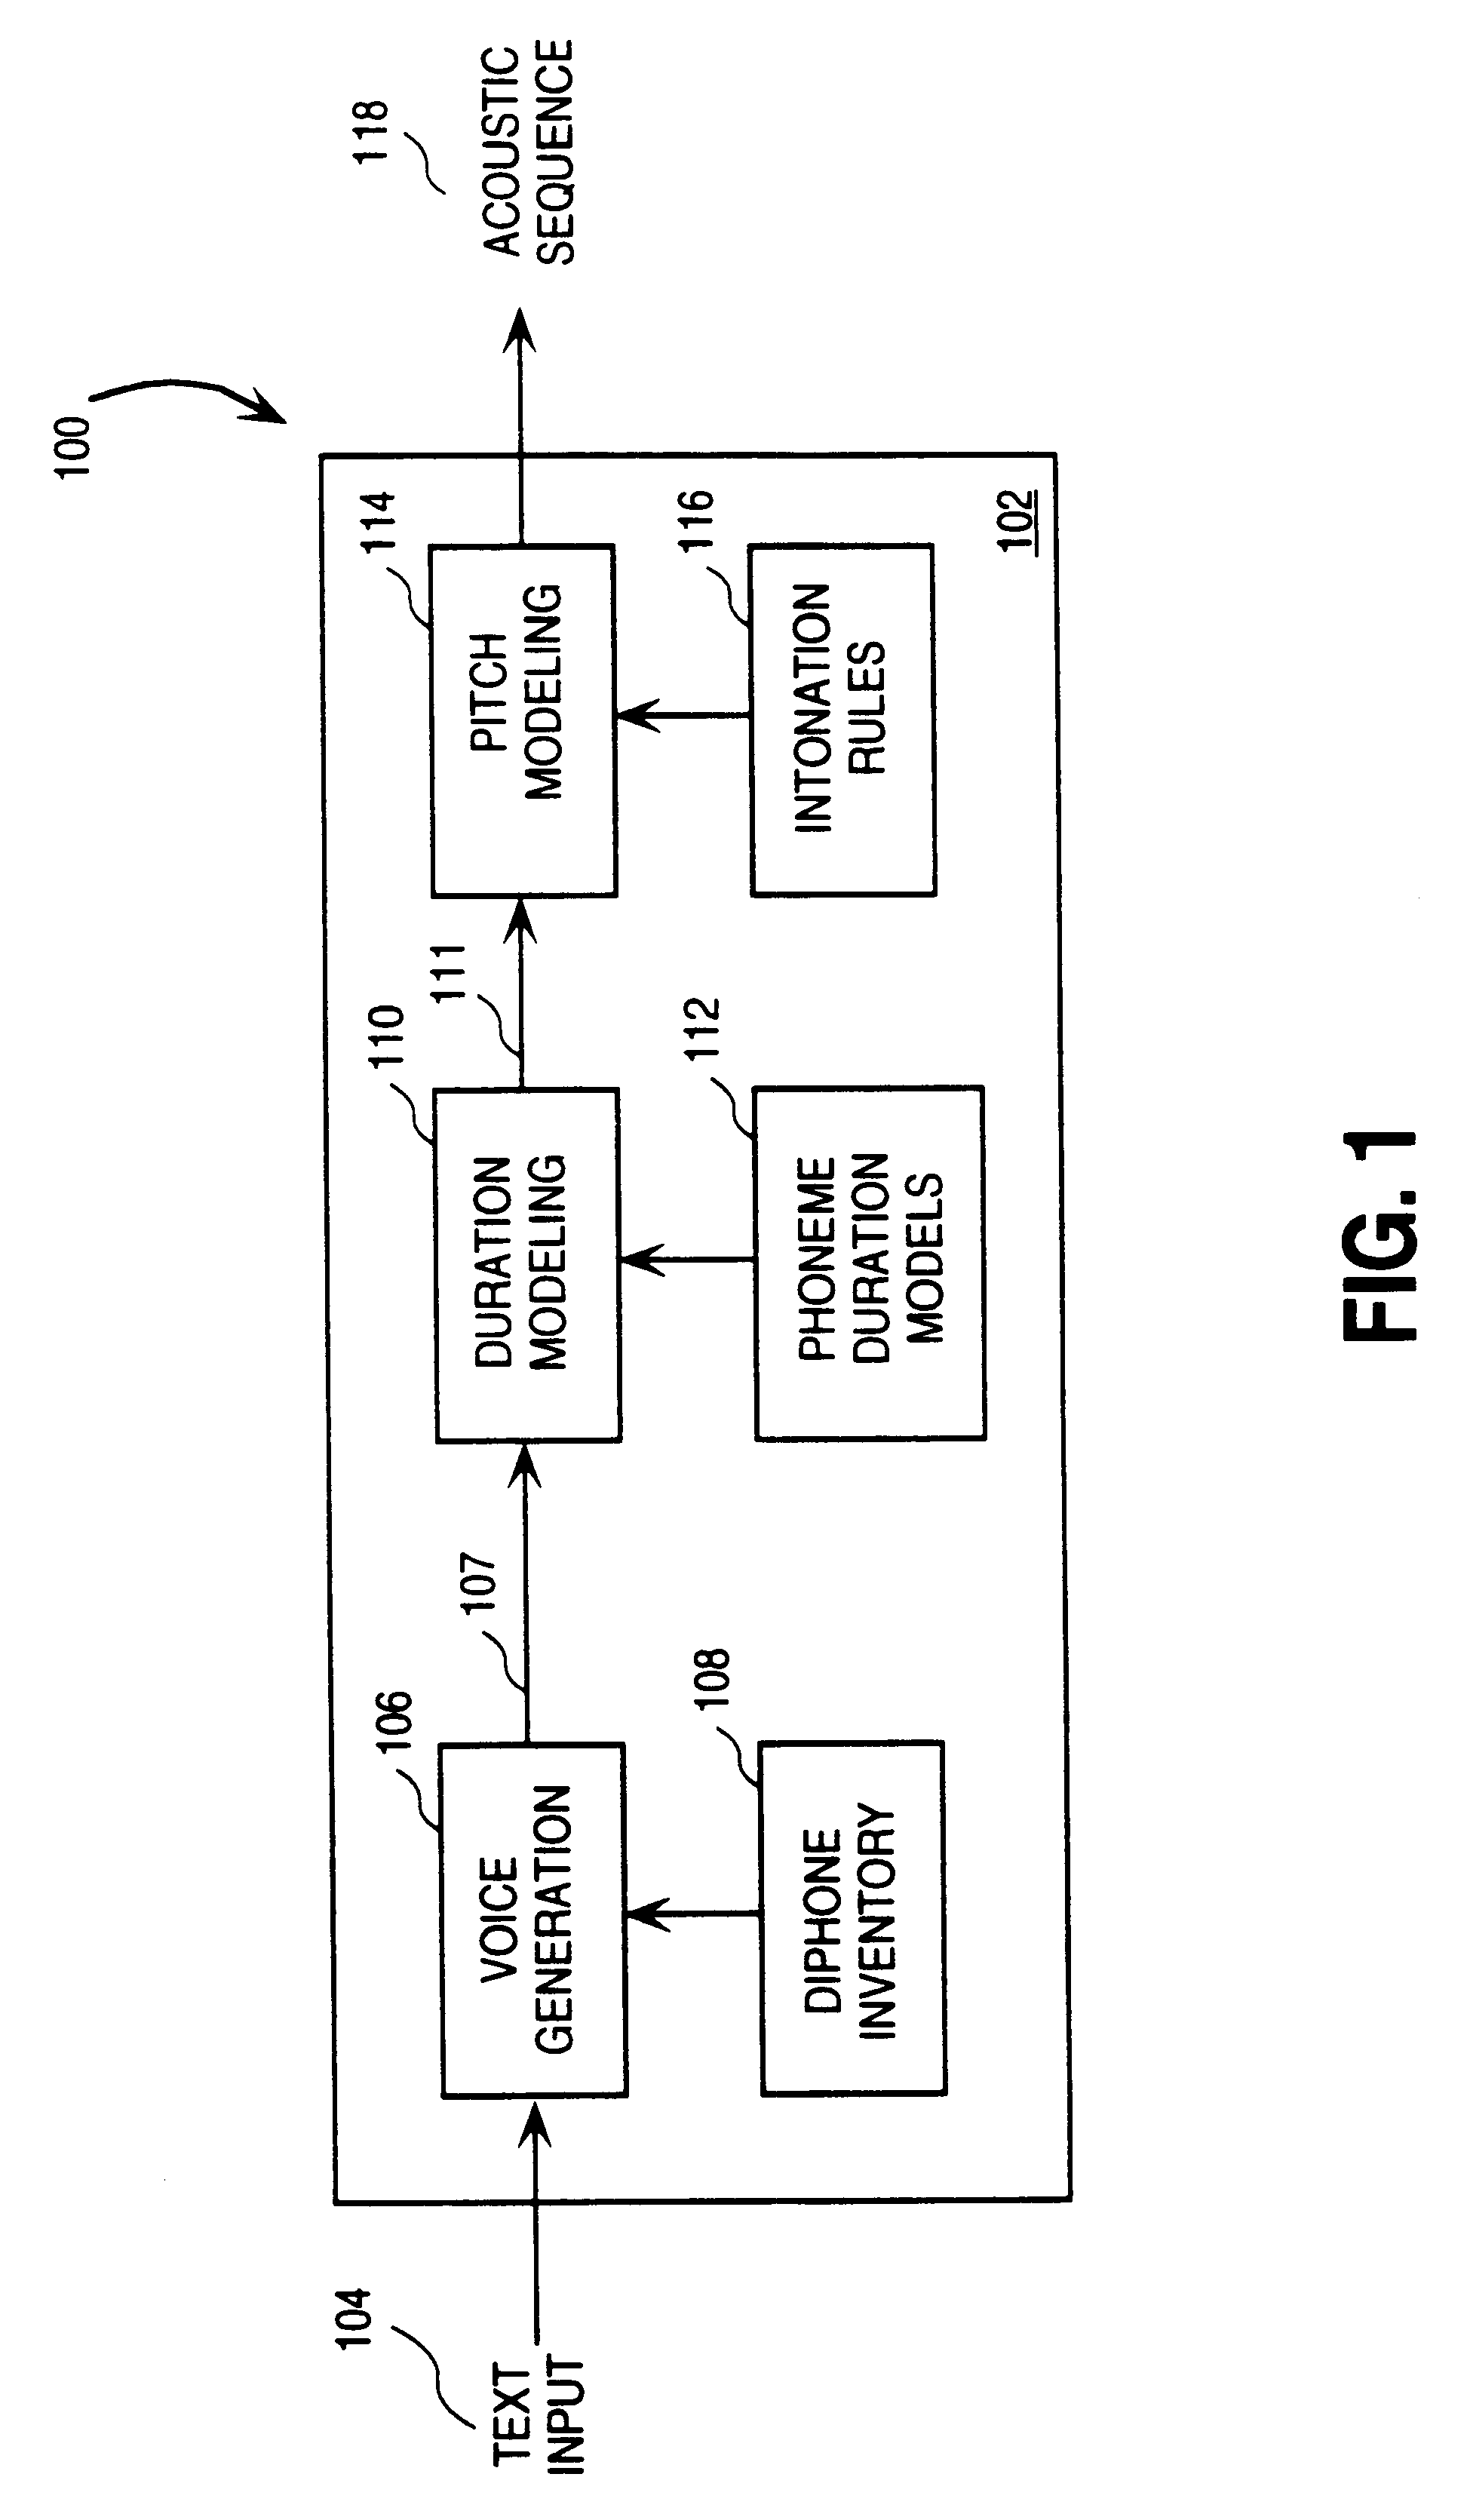 Method and apparatus for improved duration modeling of phonemes